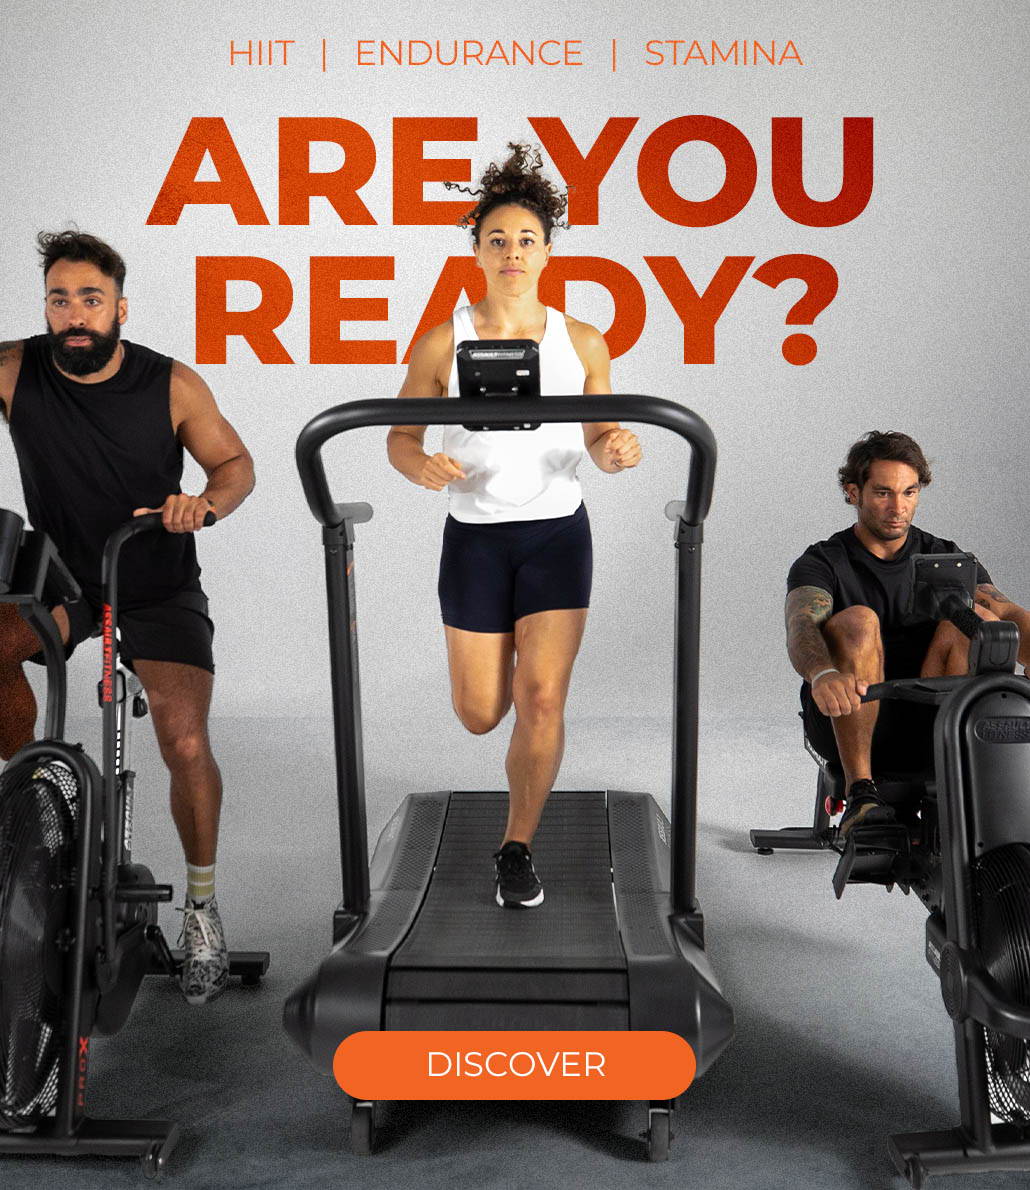 High-intensity workout equipment from Assault Fitness, known for catering to HIIT, endurance, and stamina training. Central to the visual is a dynamic display of an Assault Fitness treadmill, air bike, and rowing machine, each occupied by focused athletes mid-workout. The commanding orange text 